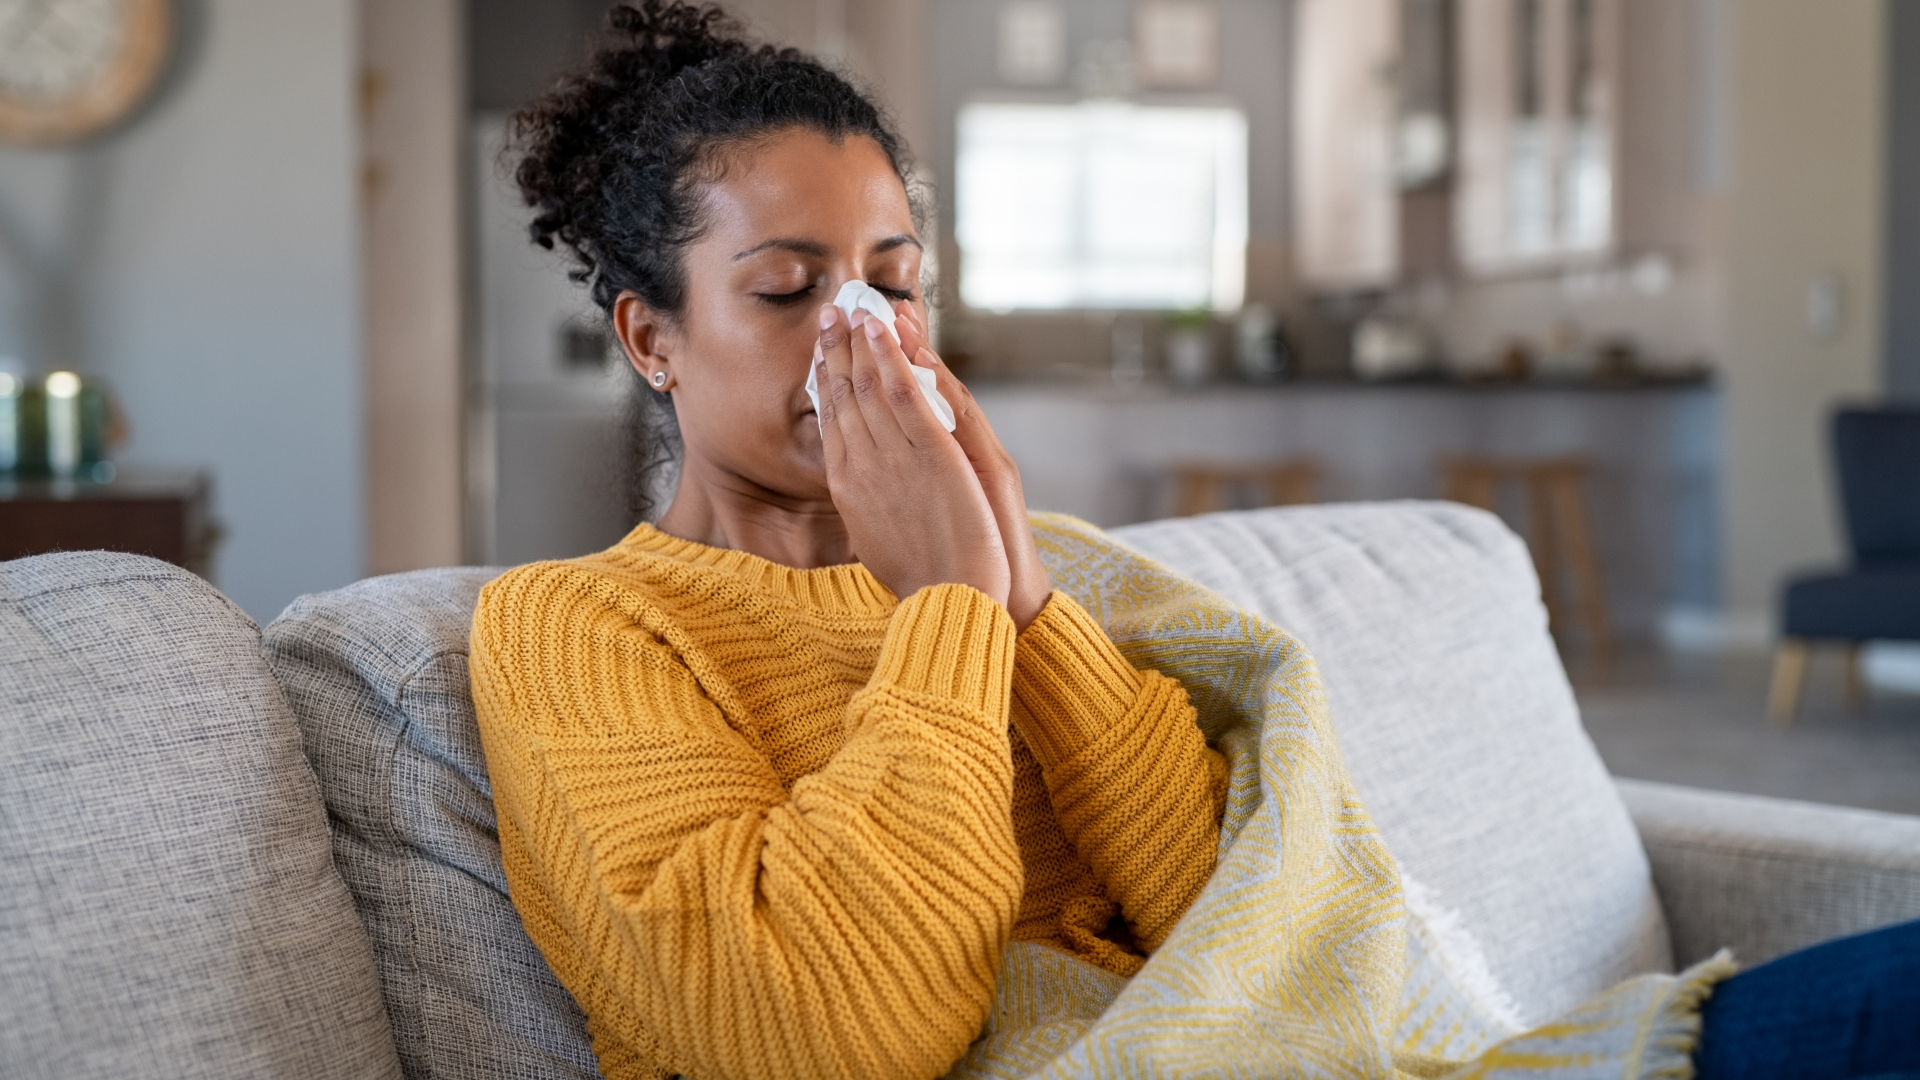 I am a nutritionist. Here are 14 ways to prevent the flu and Covid.